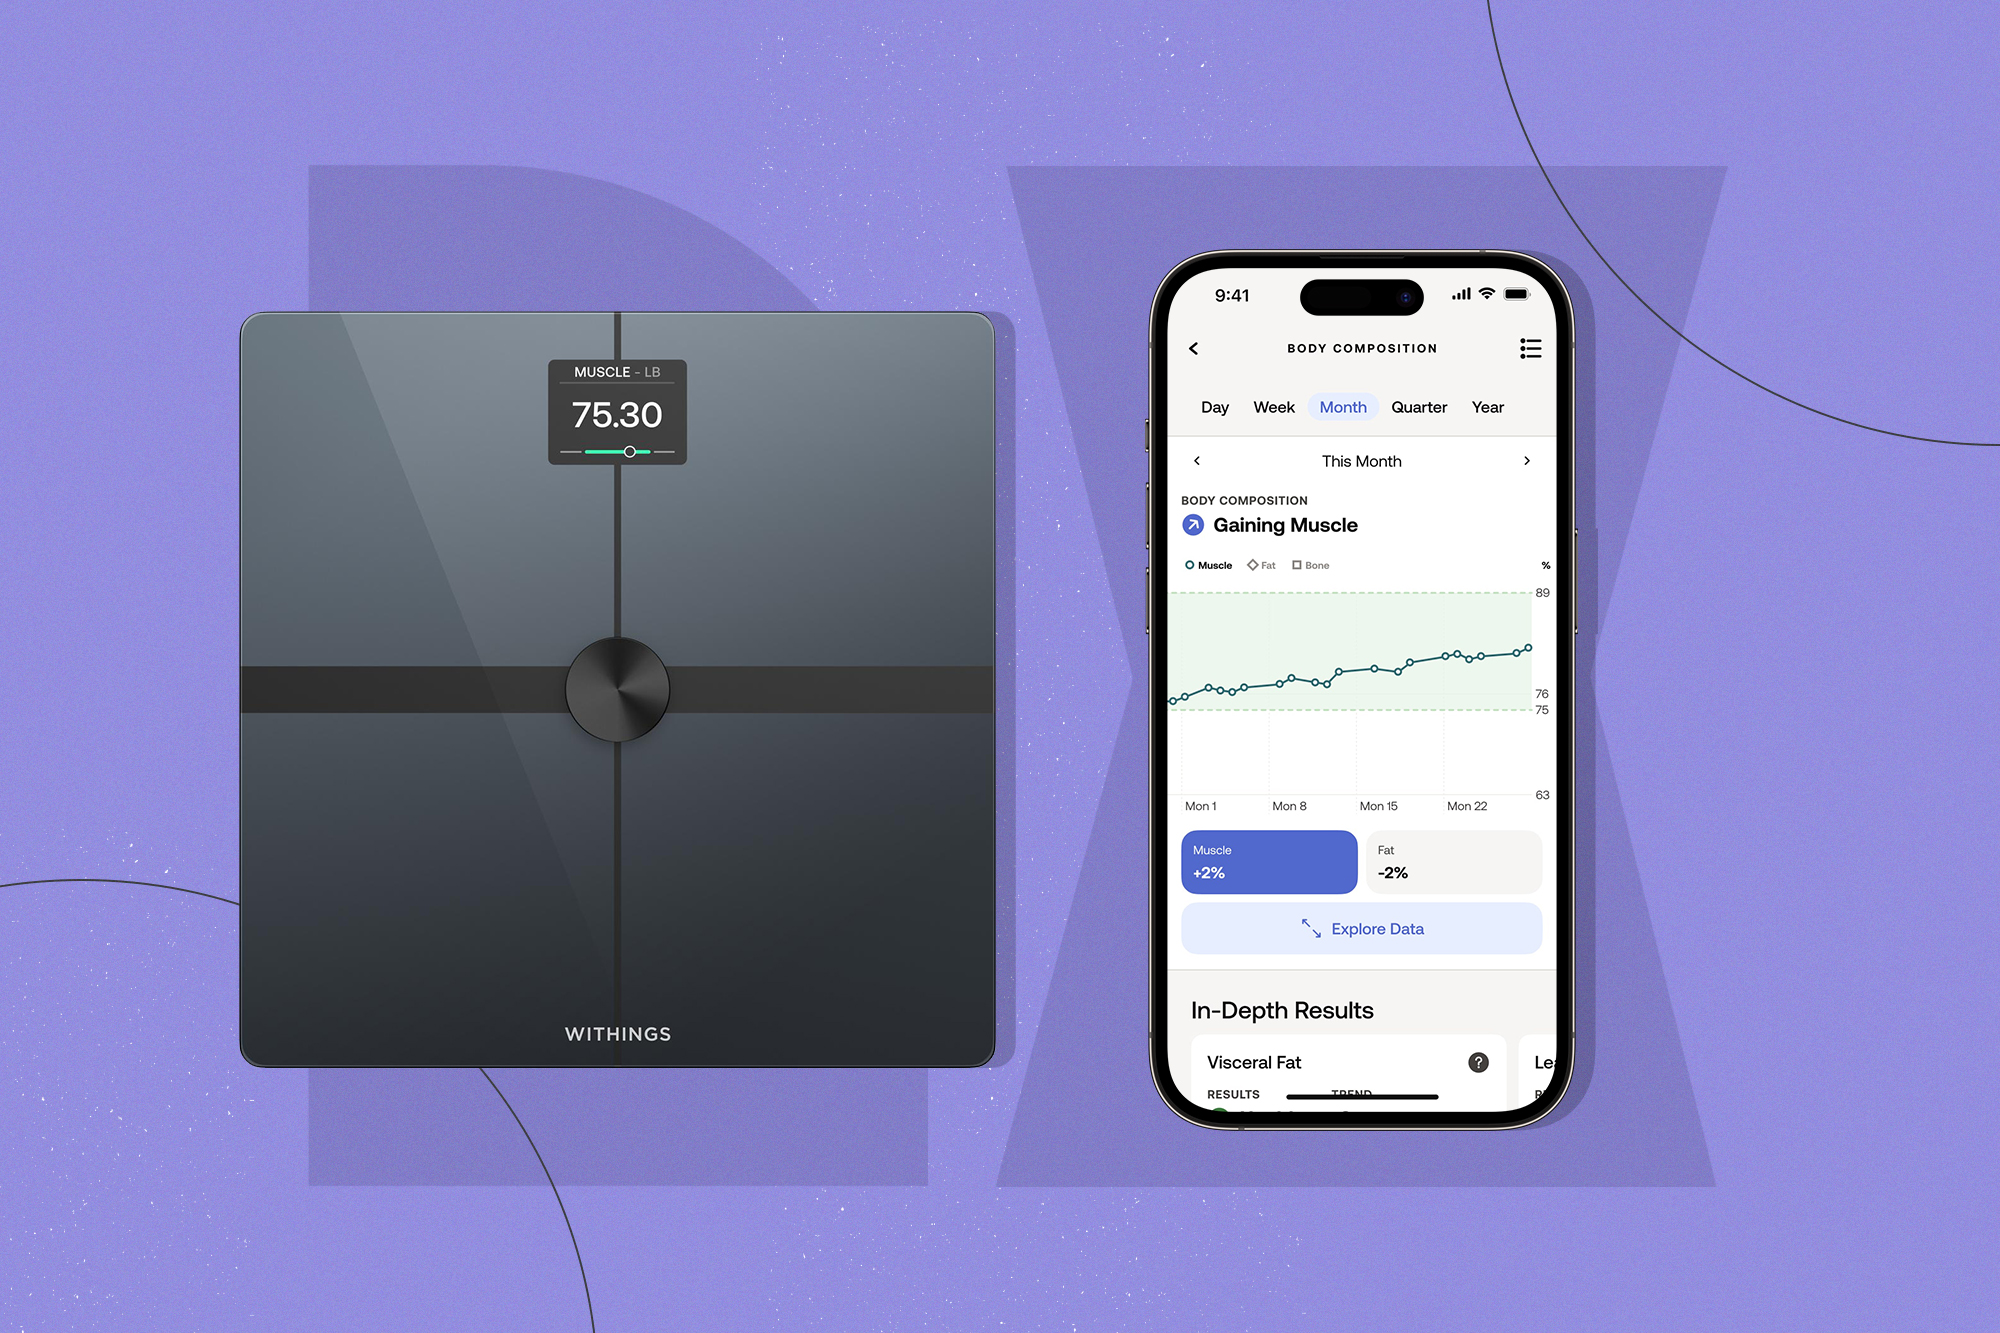 Withings' Body Scan scale can measure the composition of different parts of  your body